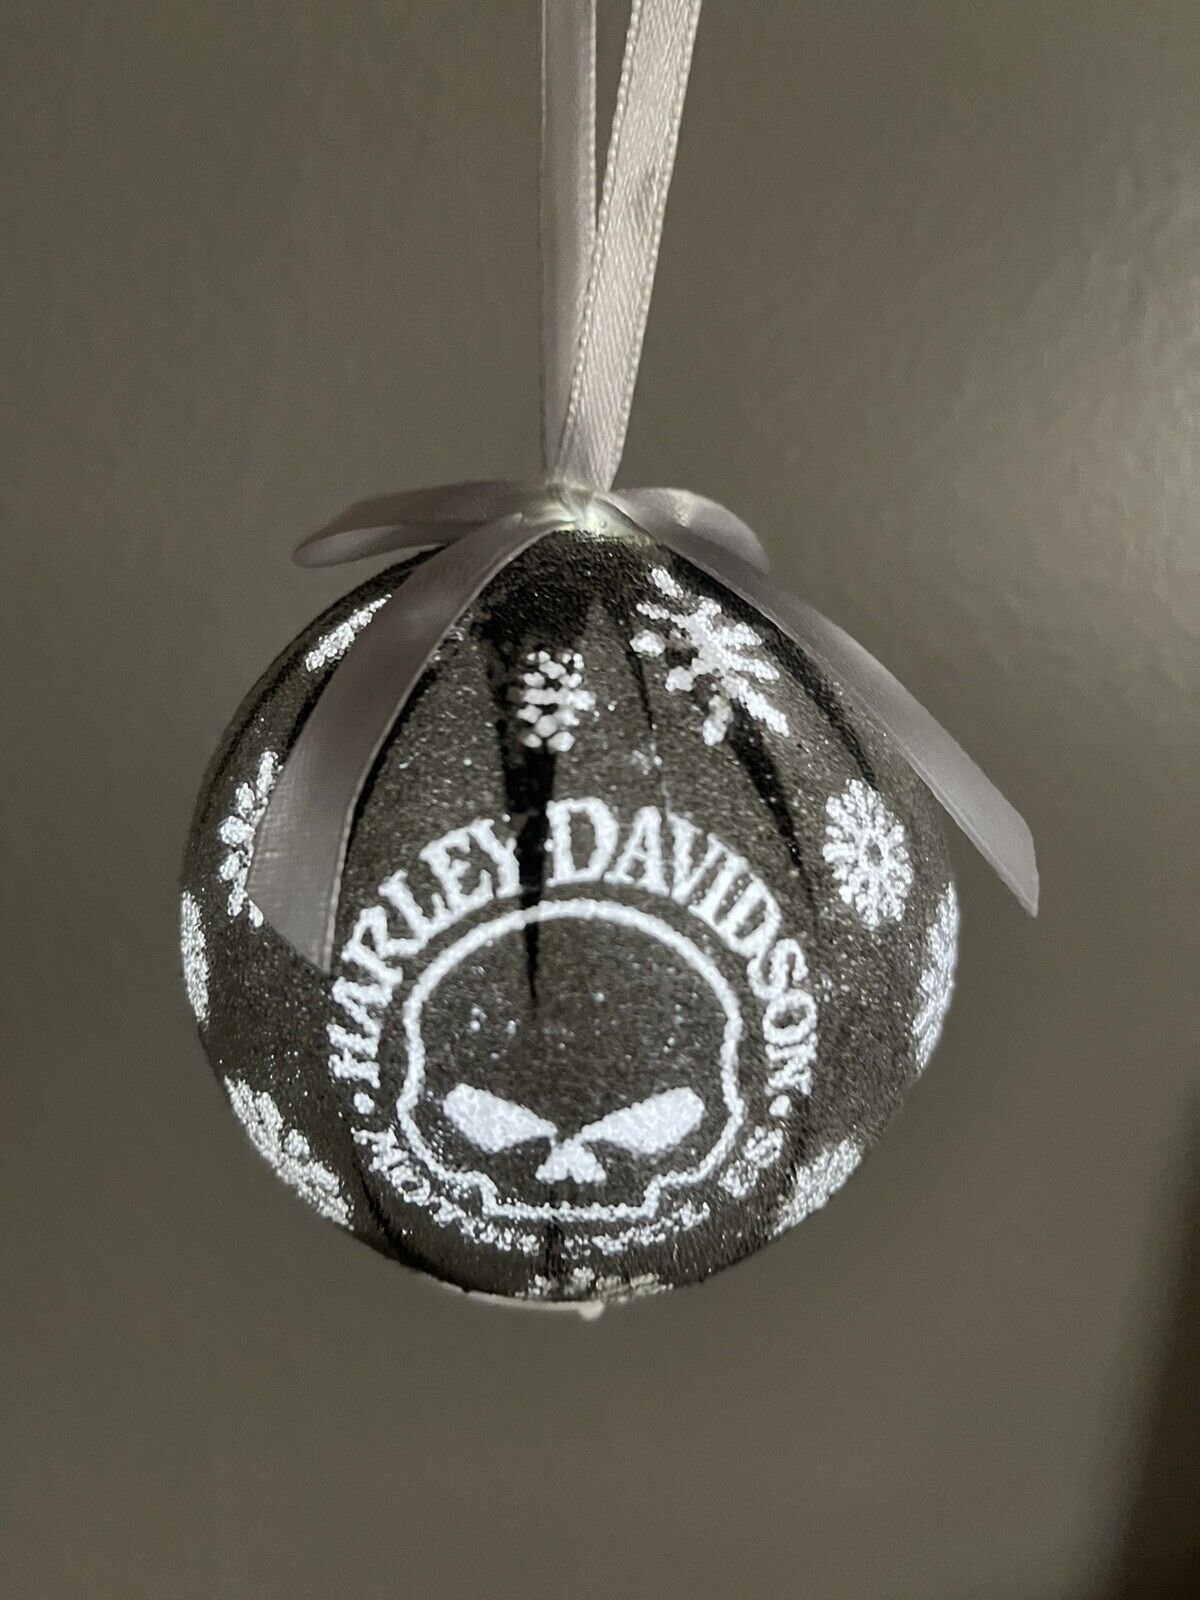 NEW Harley Davidson Motorcycles LED Light Up 3” Round Christmas Ornament Beaded